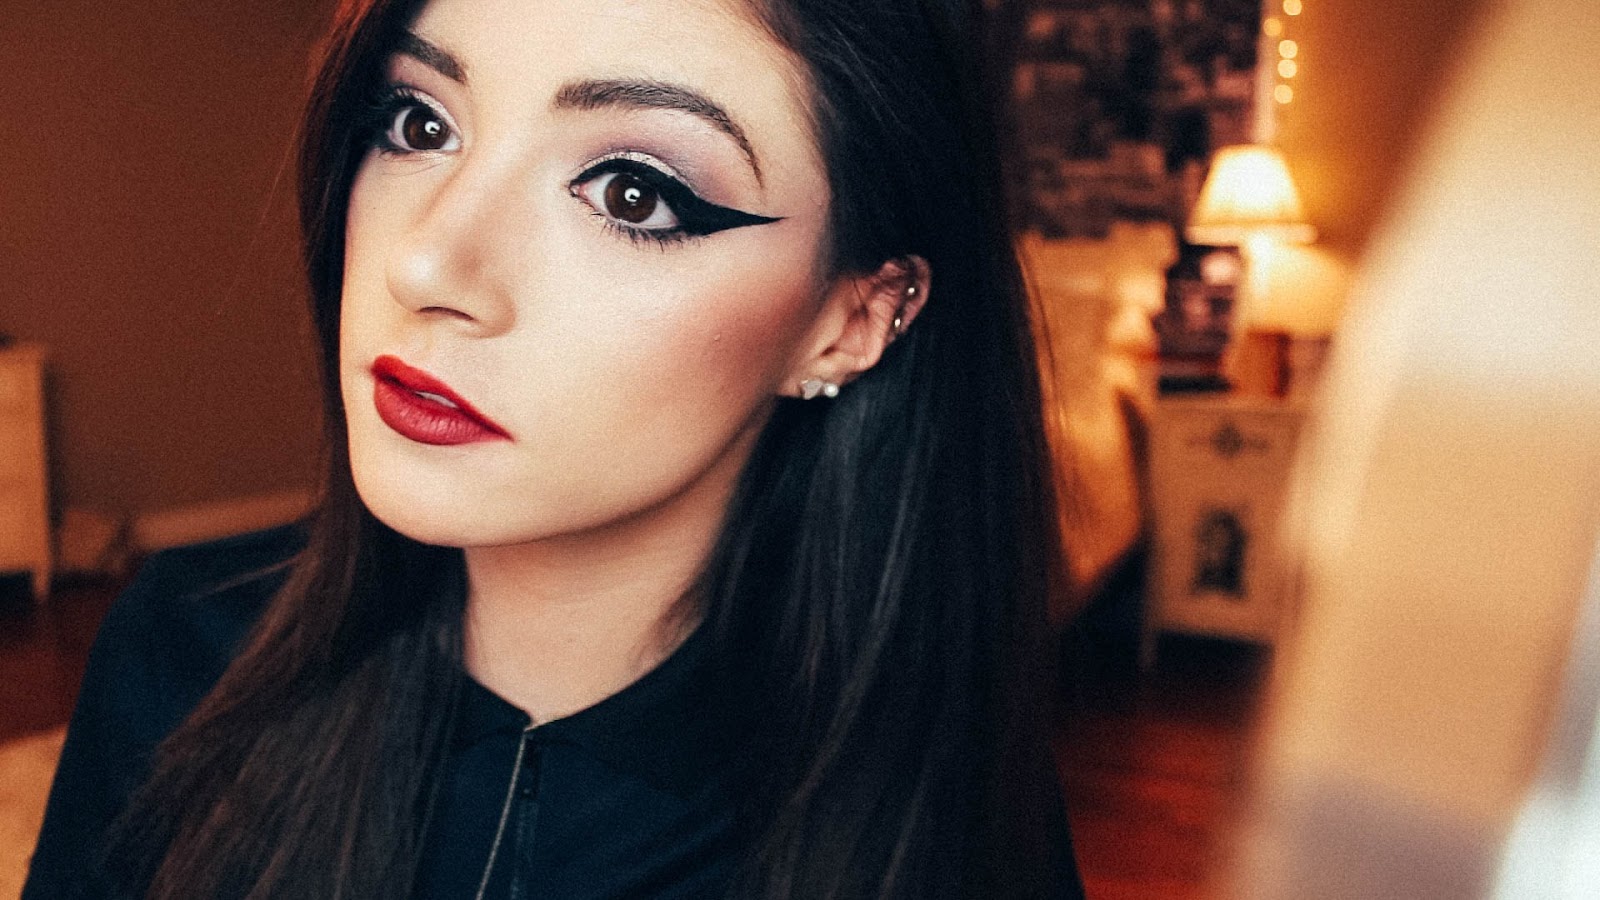 I Love Her Eyeliner, It Looks So Good On Her - Chrissy Costanza Makeup , HD Wallpaper & Backgrounds